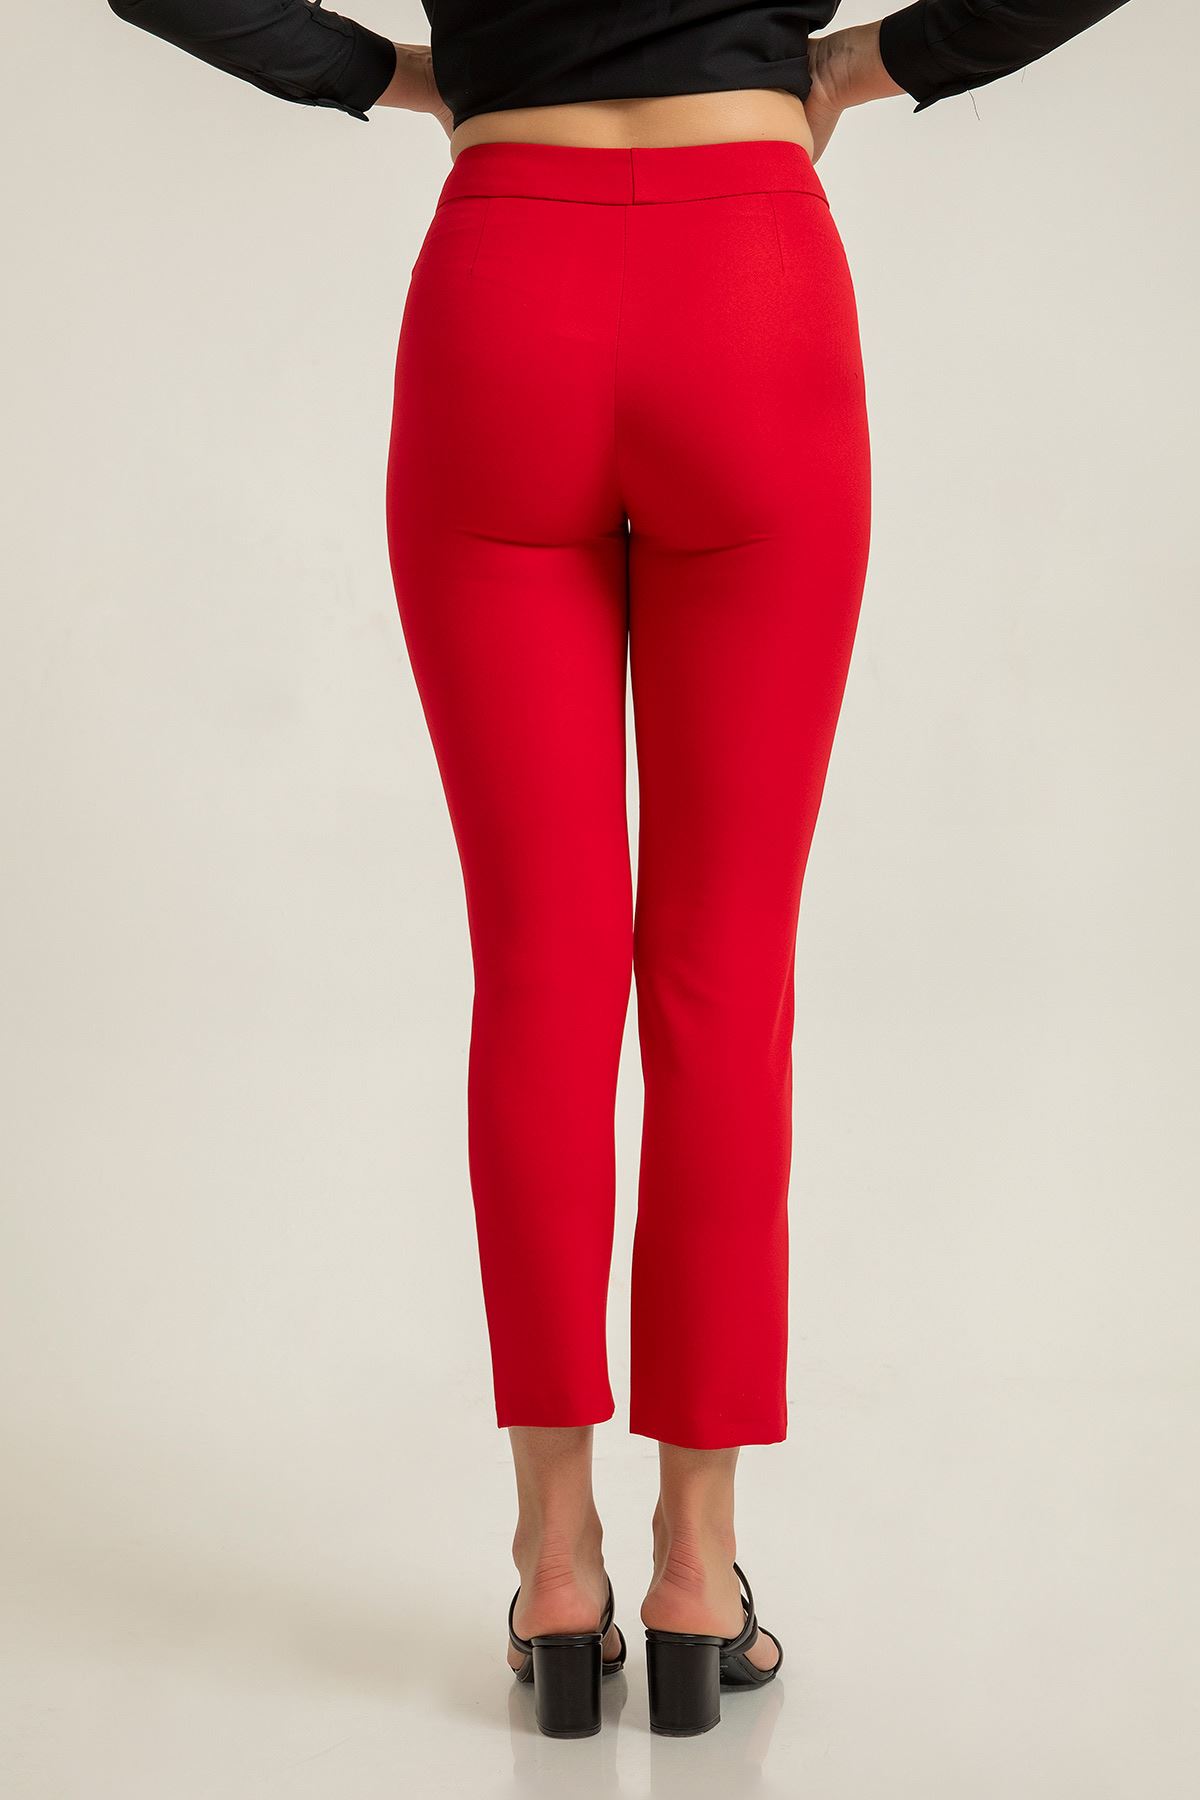 Atlas Fabric Ankle Length Tight Fit Women'S Trouser - Red